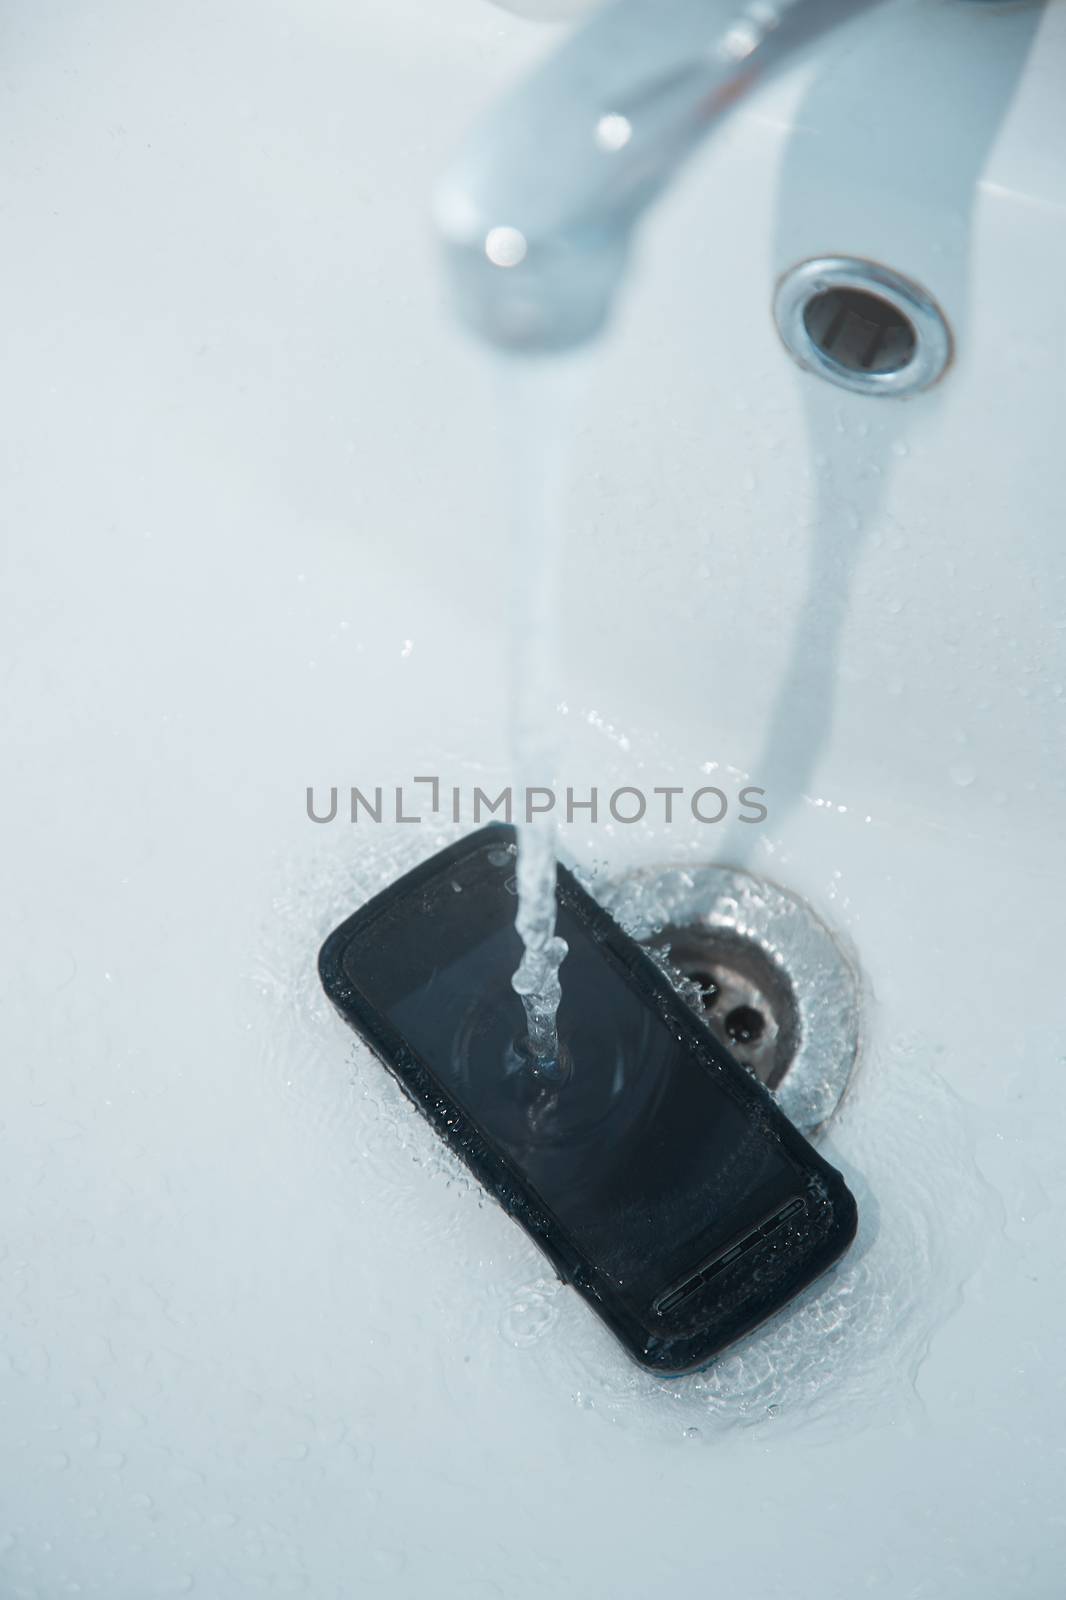 Smartphone in sink with flowing water by Novic